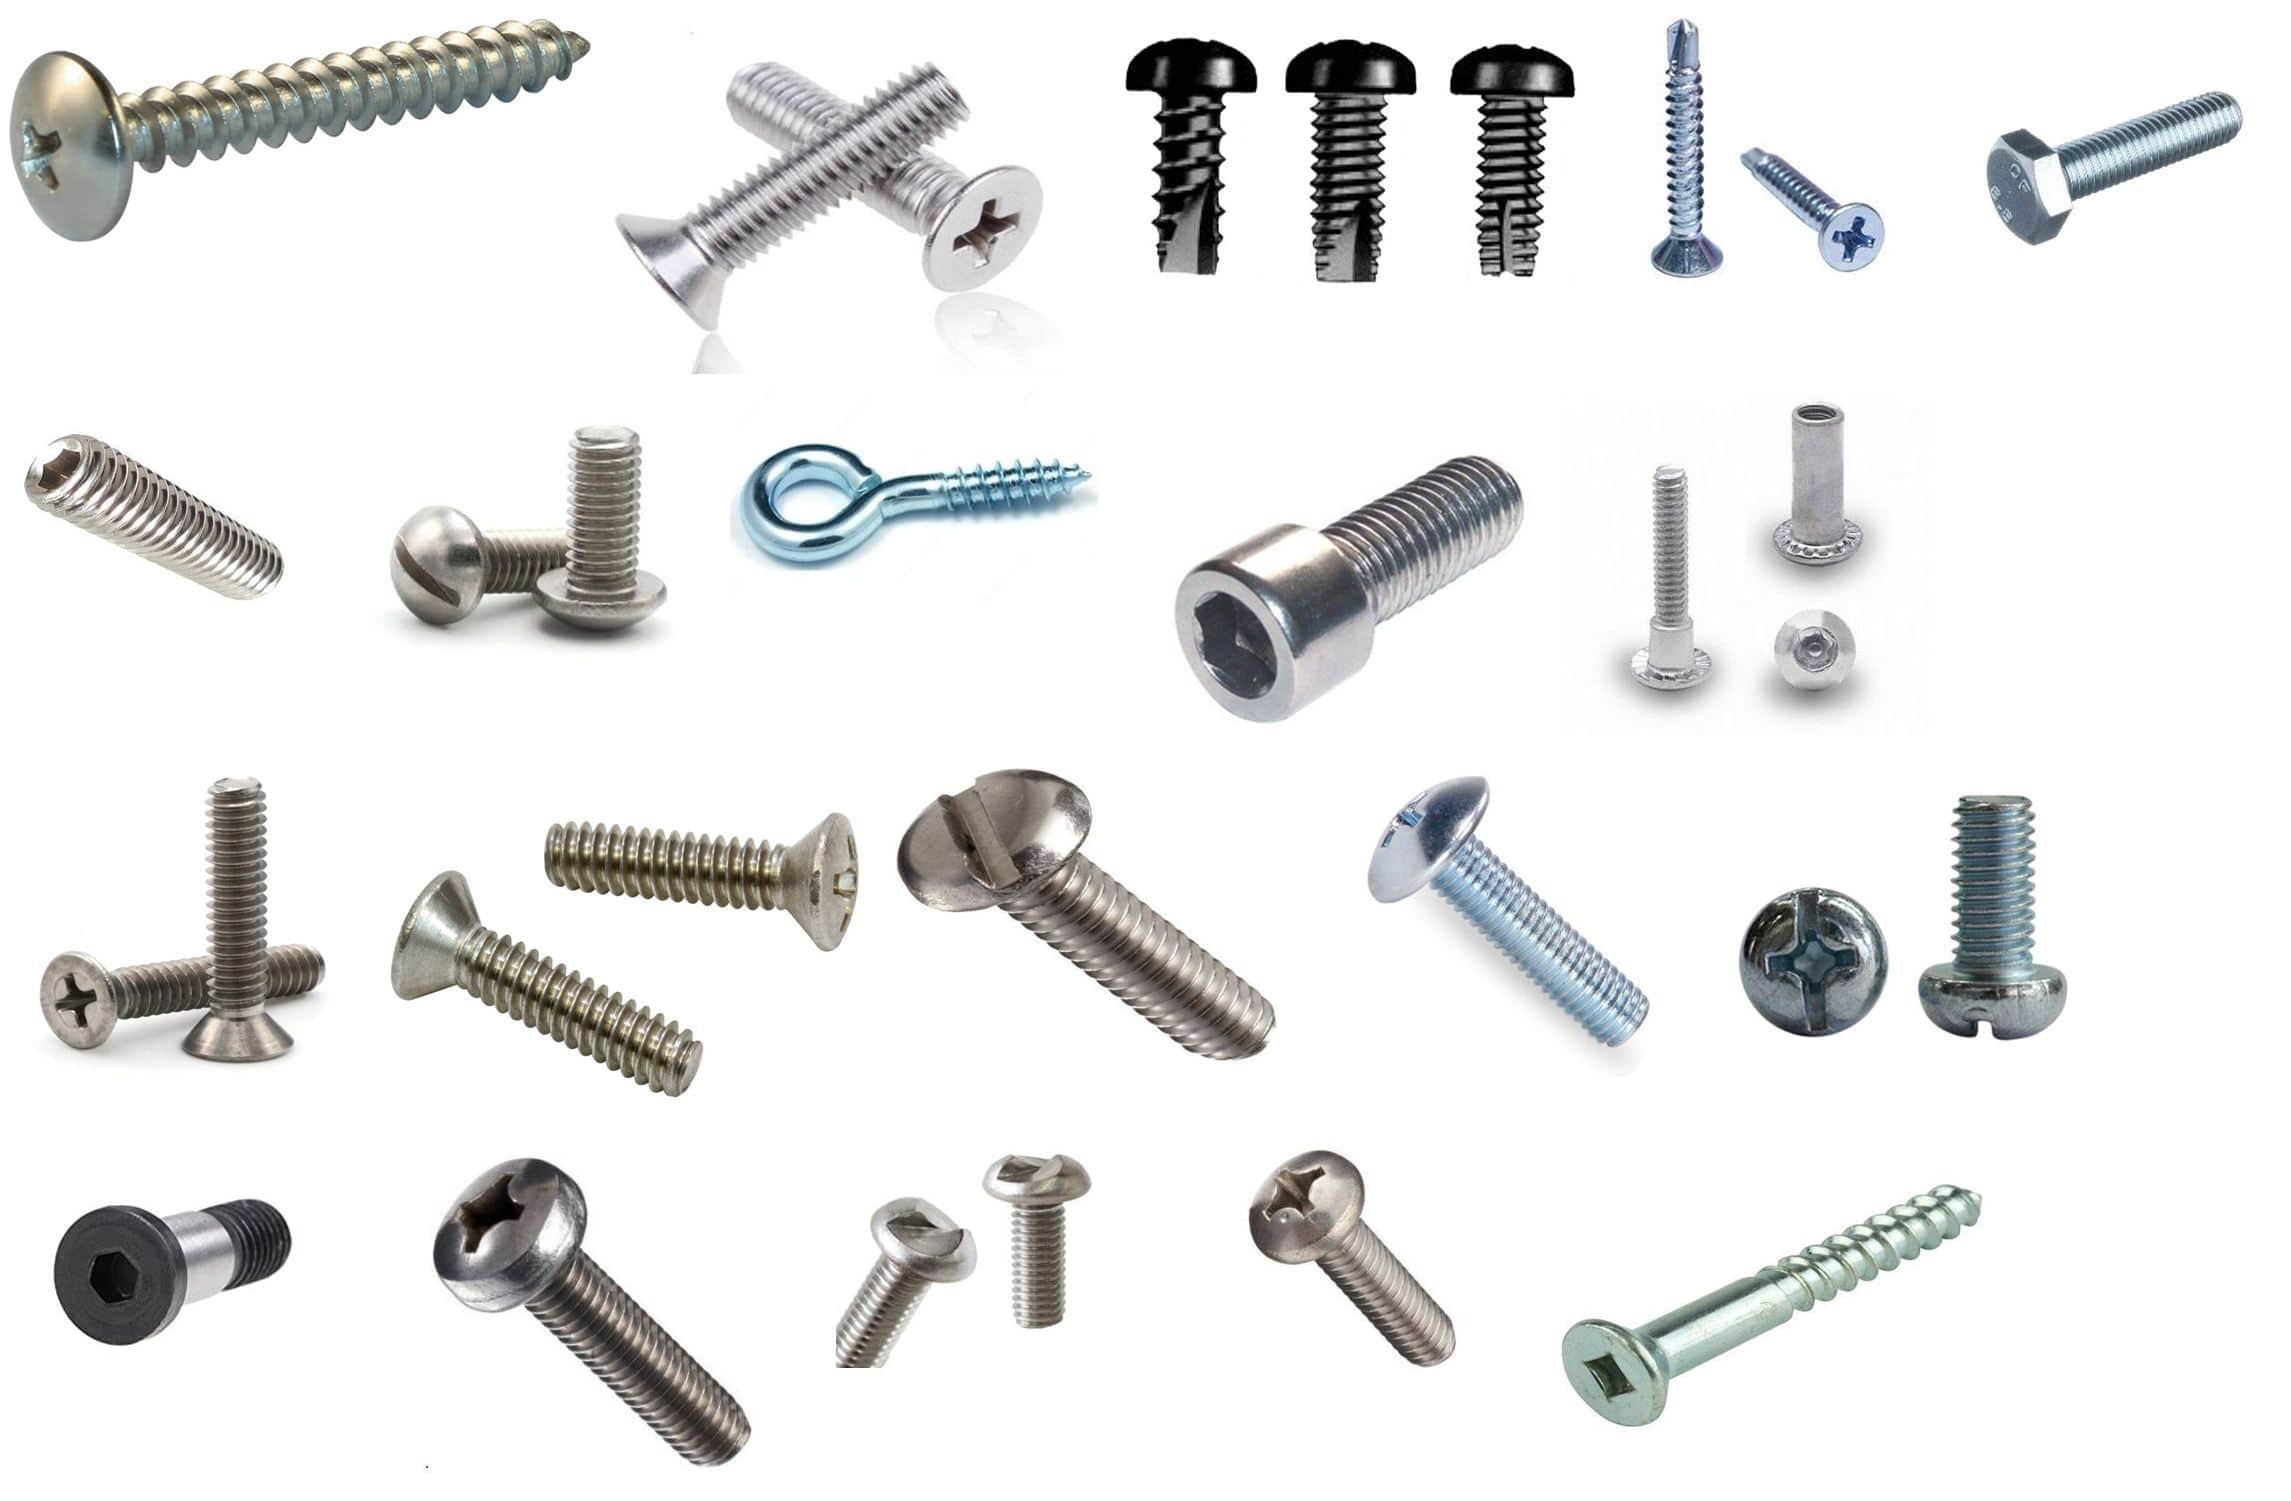 18-fun-facts-about-screws